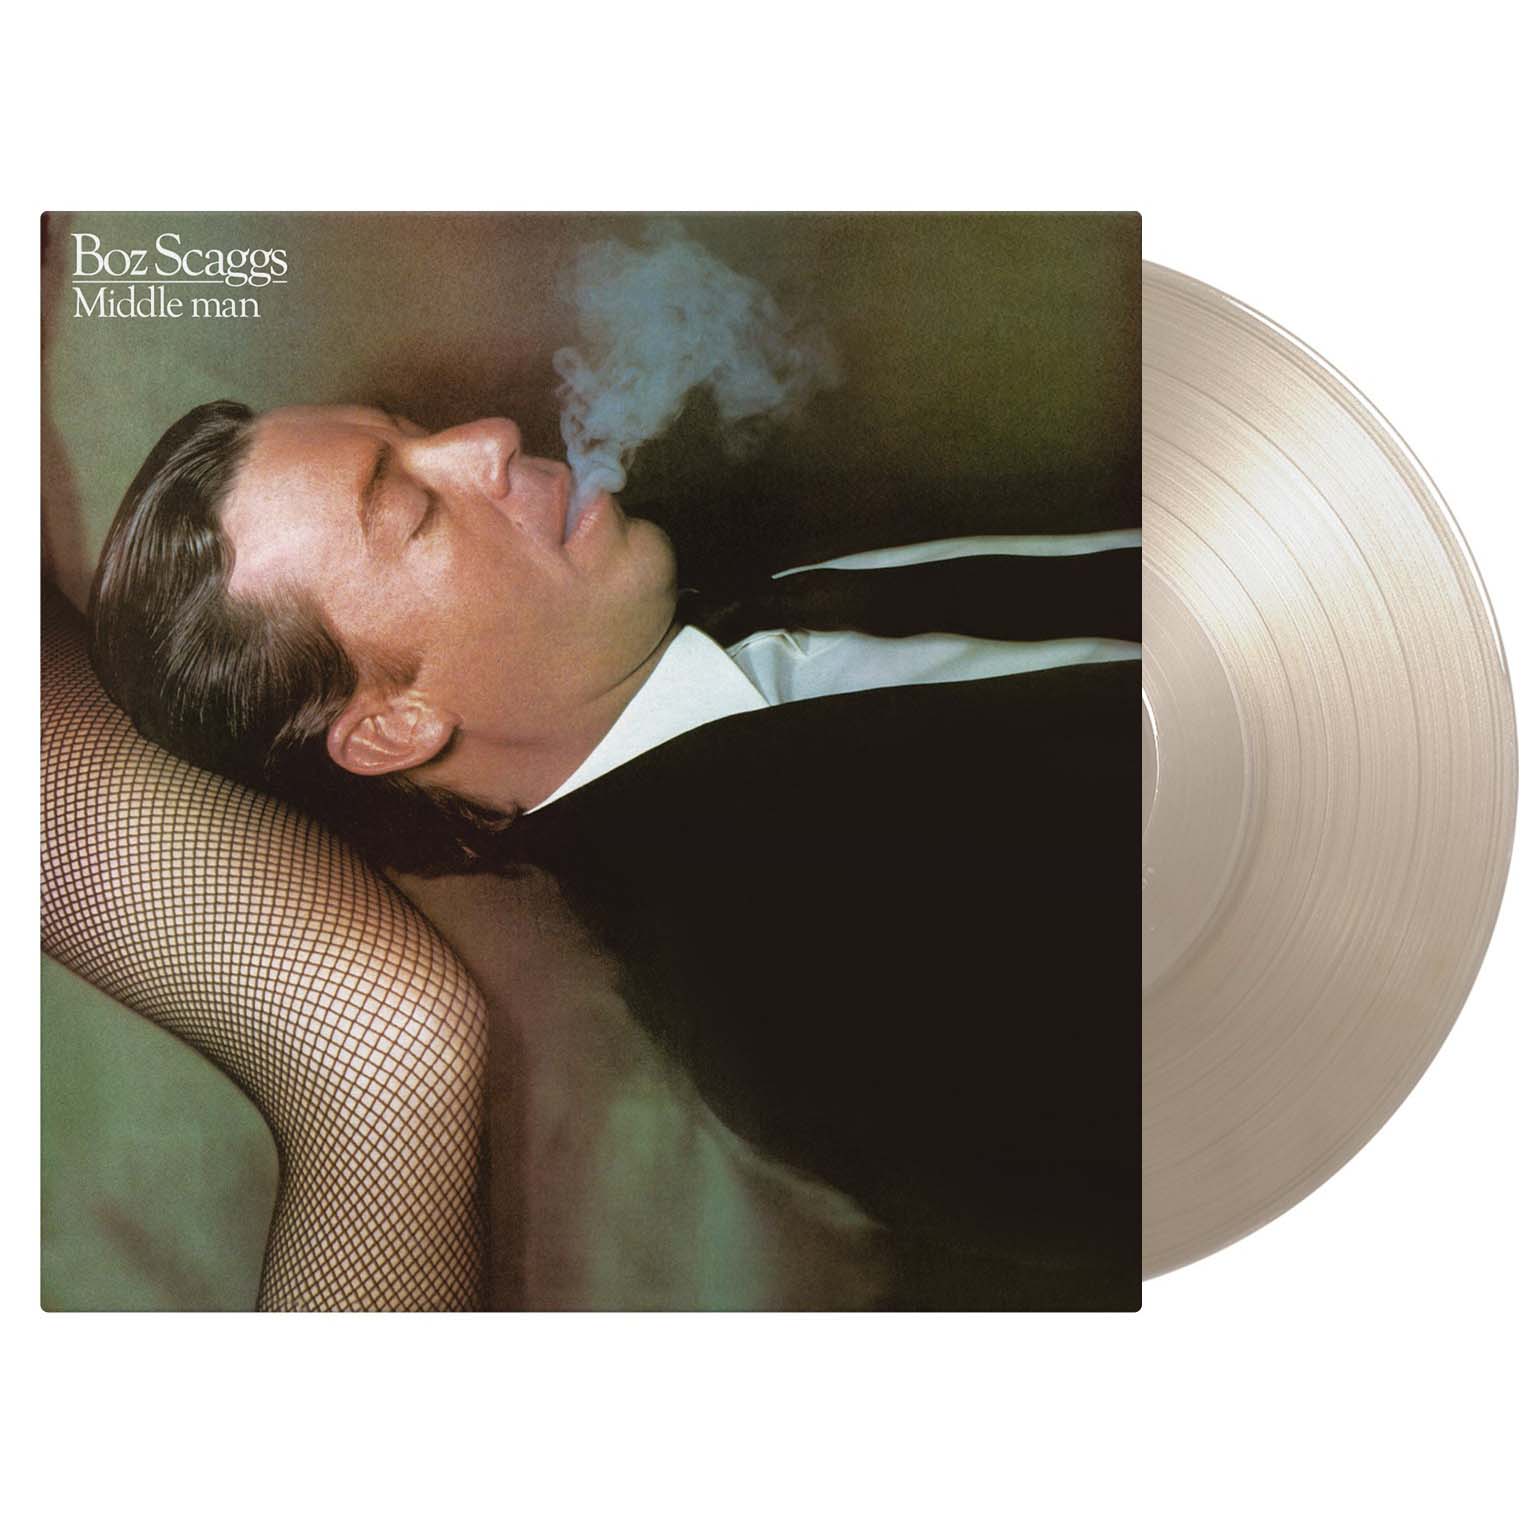 Boz Scaggs - Middle Man: Limited Crystal Clear Vinyl LP